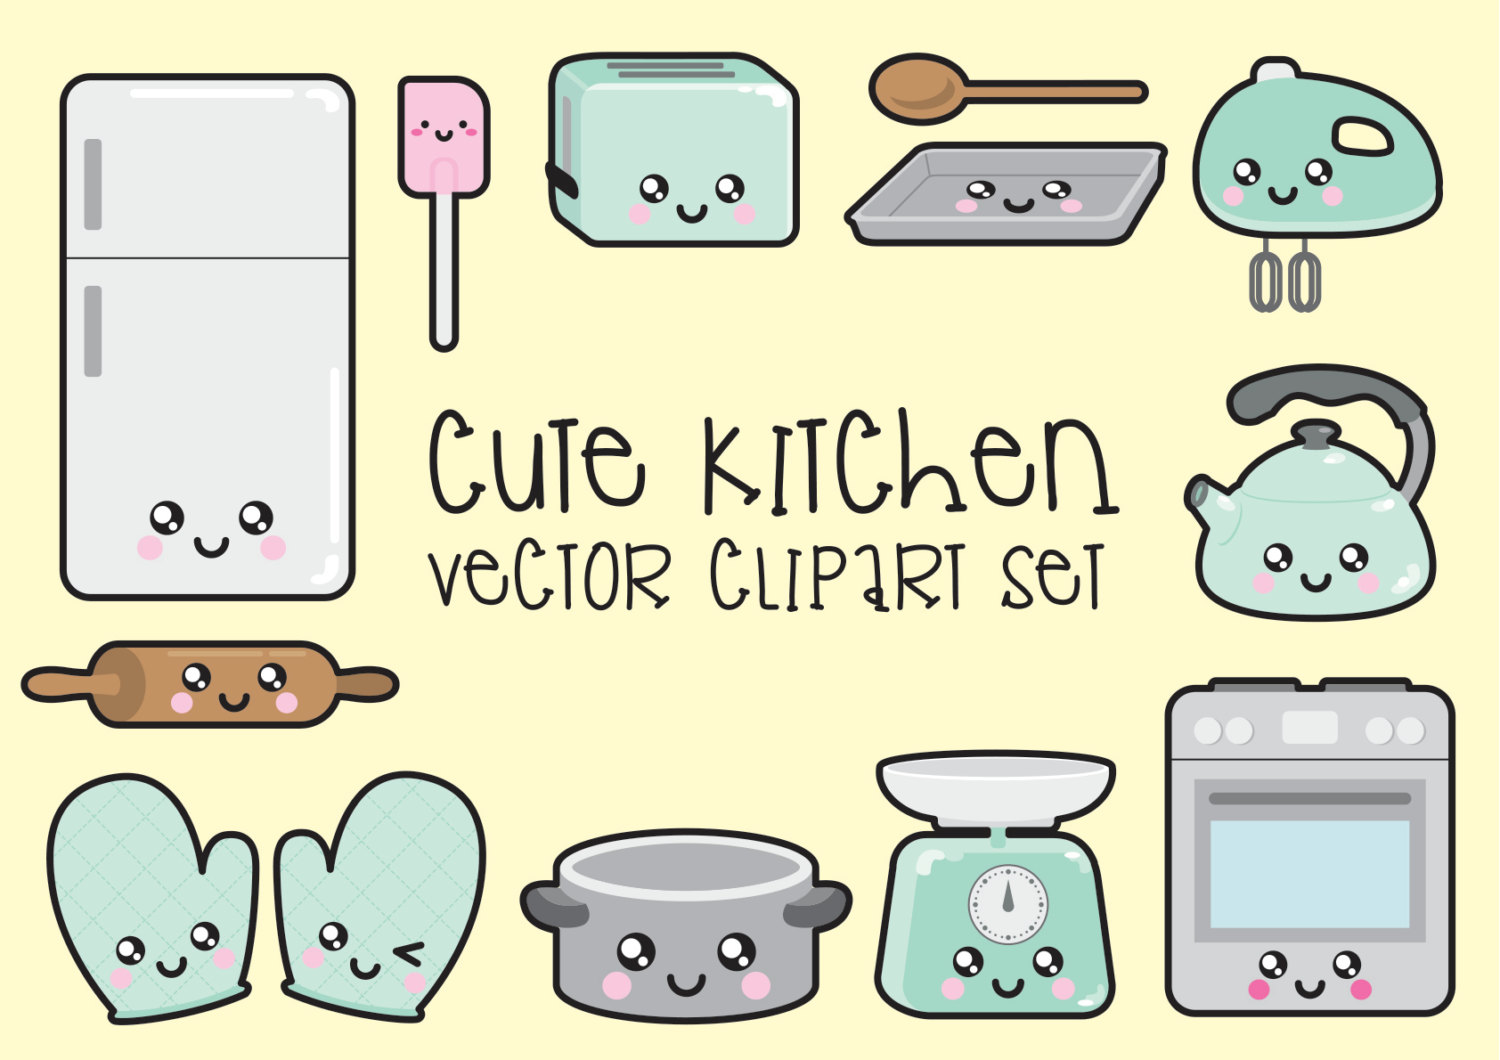 Popular items for kitchen clipart 